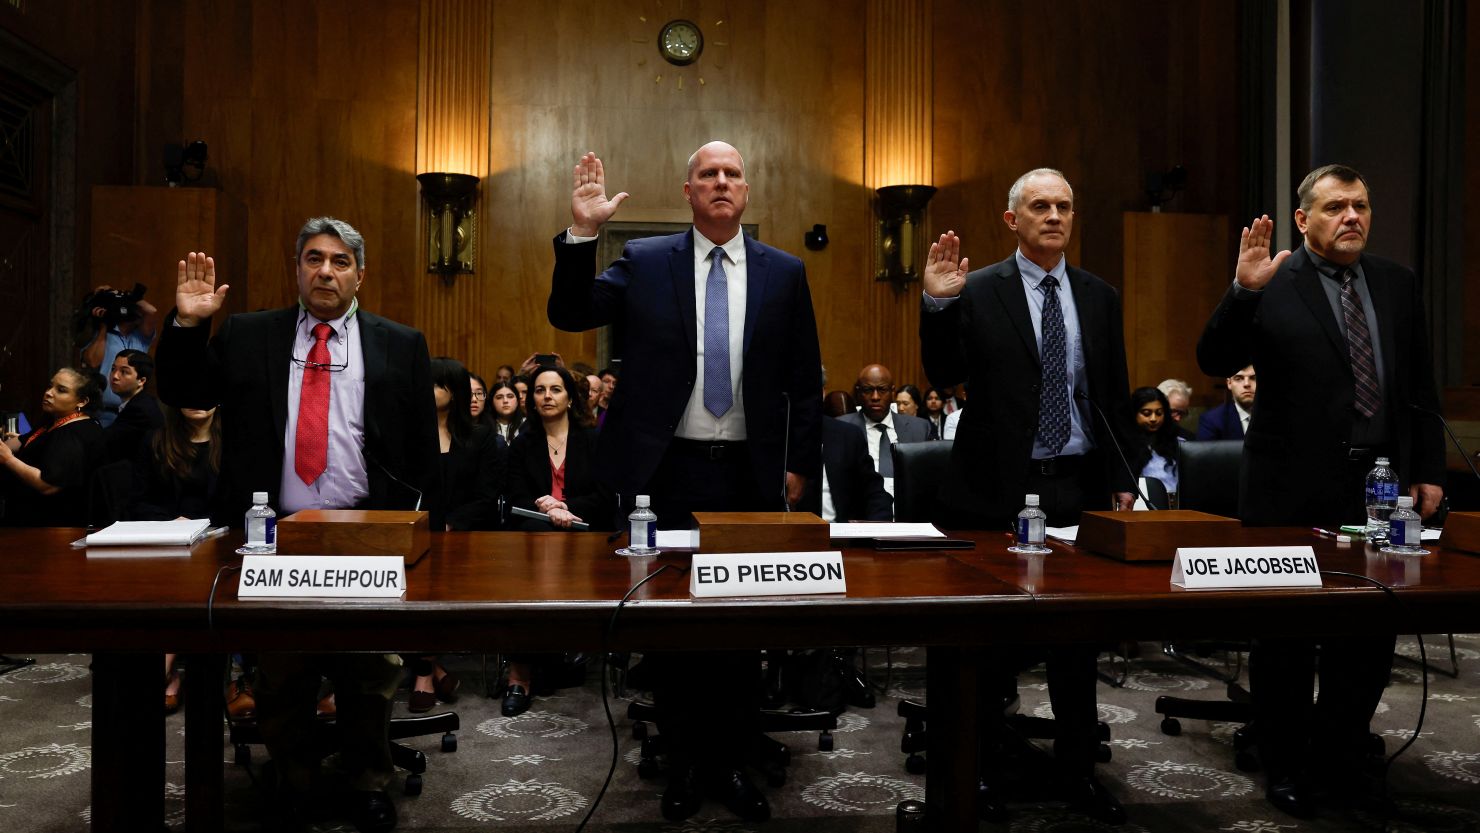 Exposed Whistleblowers Reveal Boeing’s Safety Oversights in Shocking Senate Testimony5